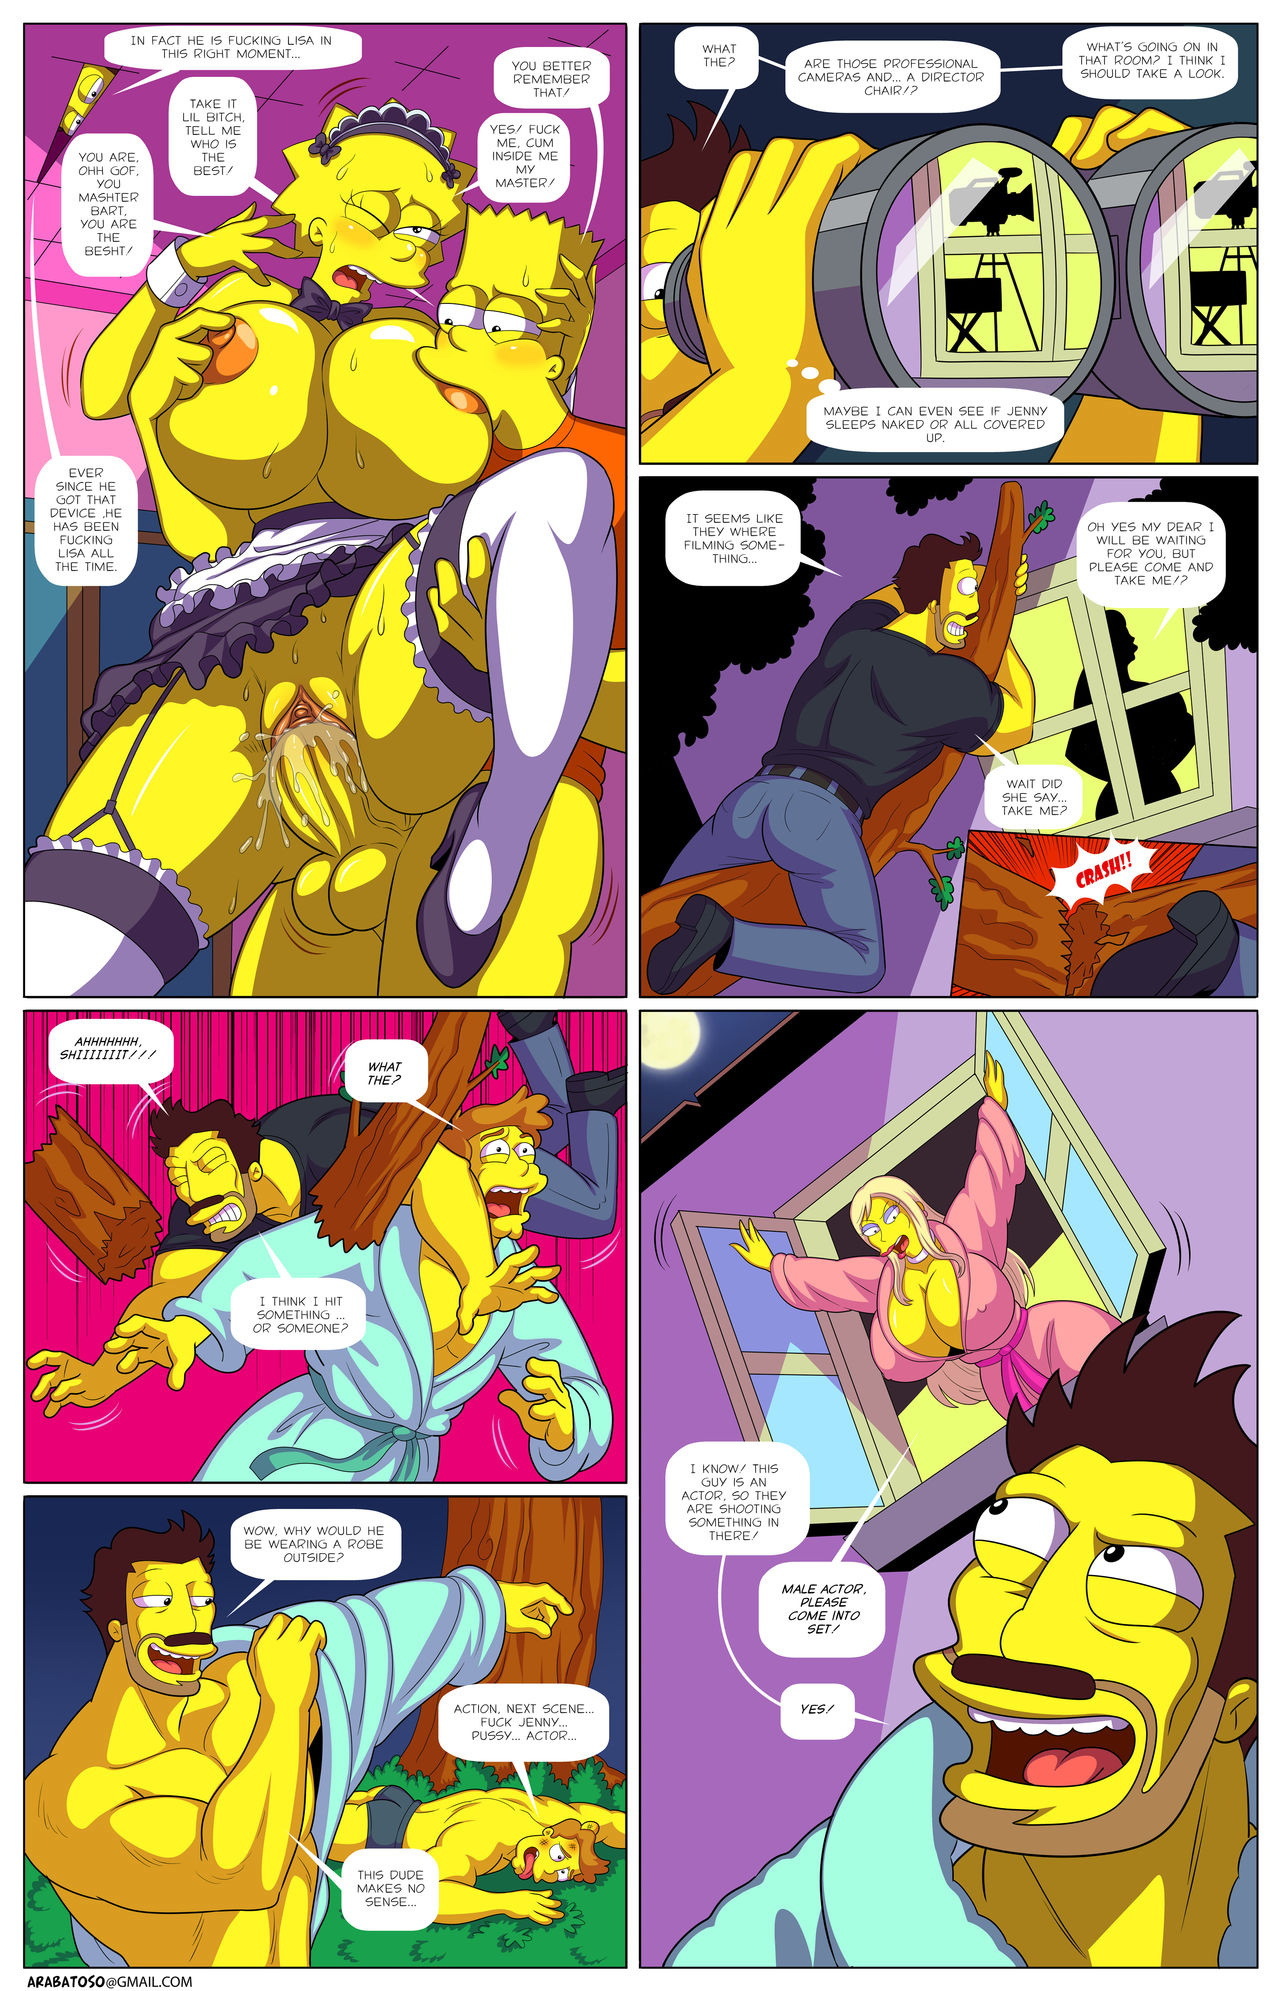 Darren's Adventure or Welcome To Springfield - Page 42